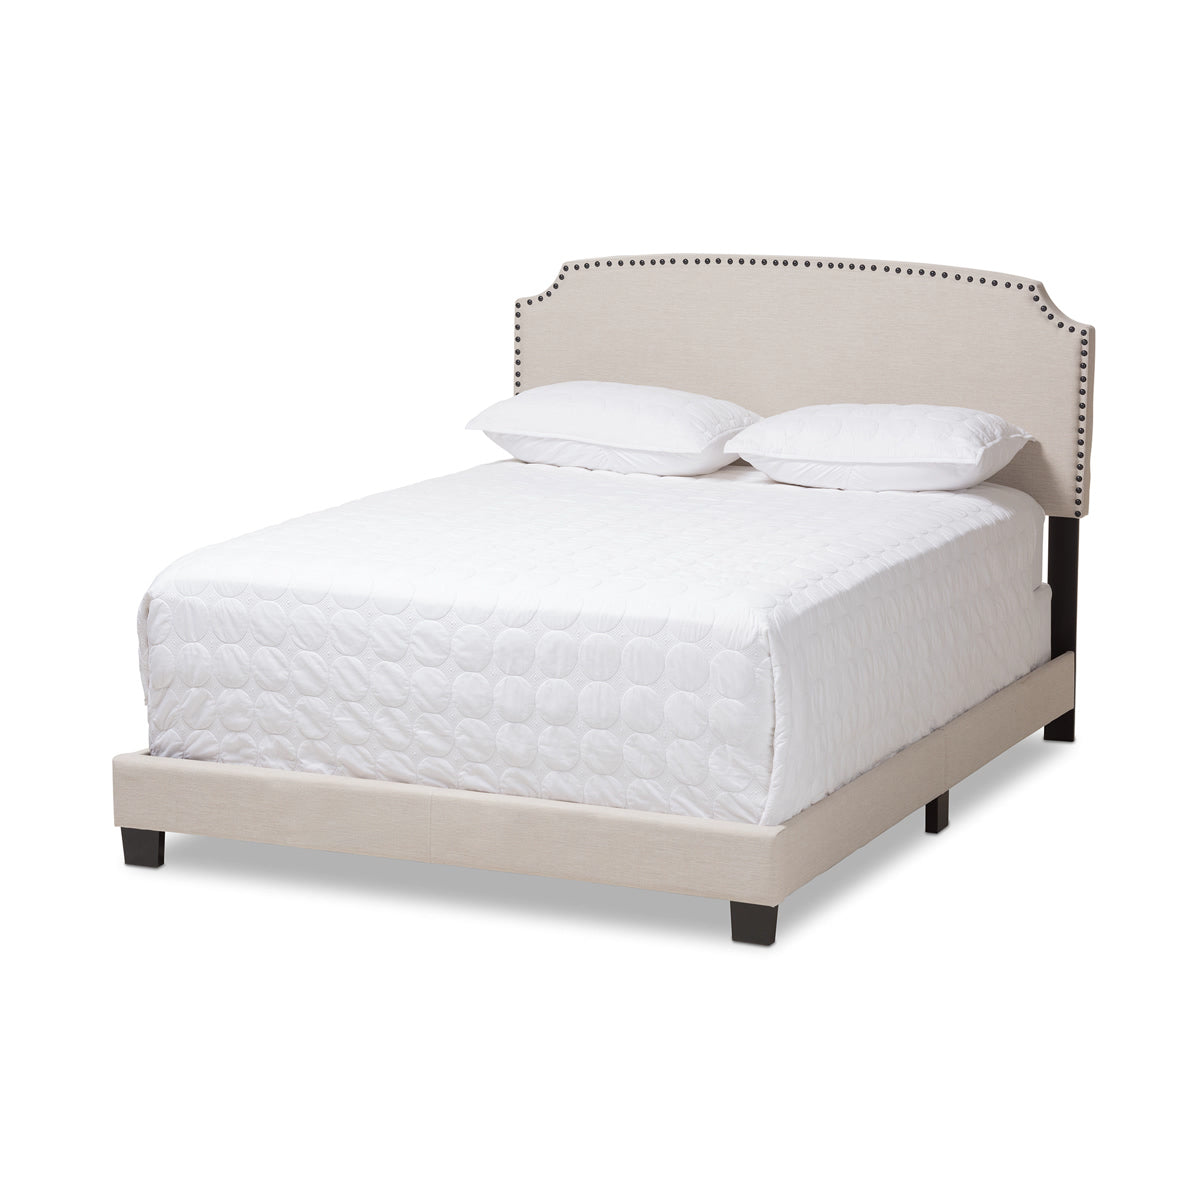 Baxton Studio Odette Modern and Contemporary Light Beige Fabric Upholstered Queen Size Bed Baxton Studio-0-Minimal And Modern - 1